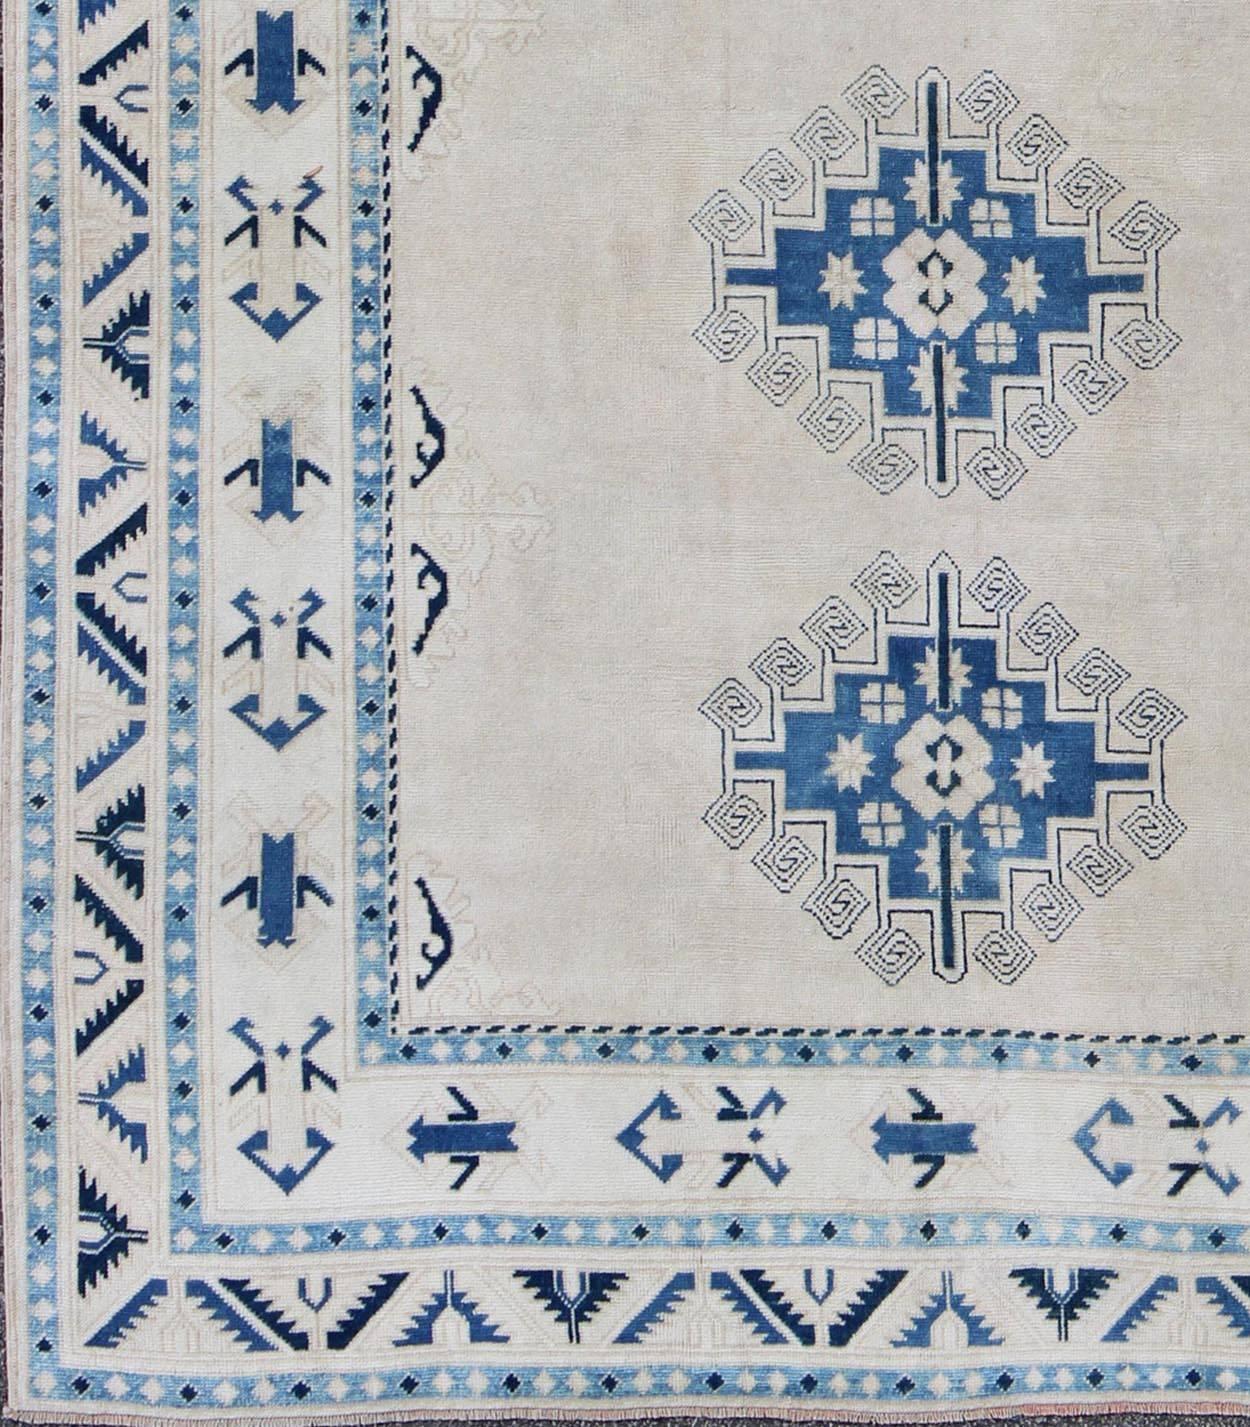 Turkish vintage Oushak rug with four Medallion geometric design in blue and cream, rug en-165347, country of origin / type: Turkey / Oushak, circa 1940

This striking vintage Turkish Oushak rug bears an cream-ish background that is highlighted by a